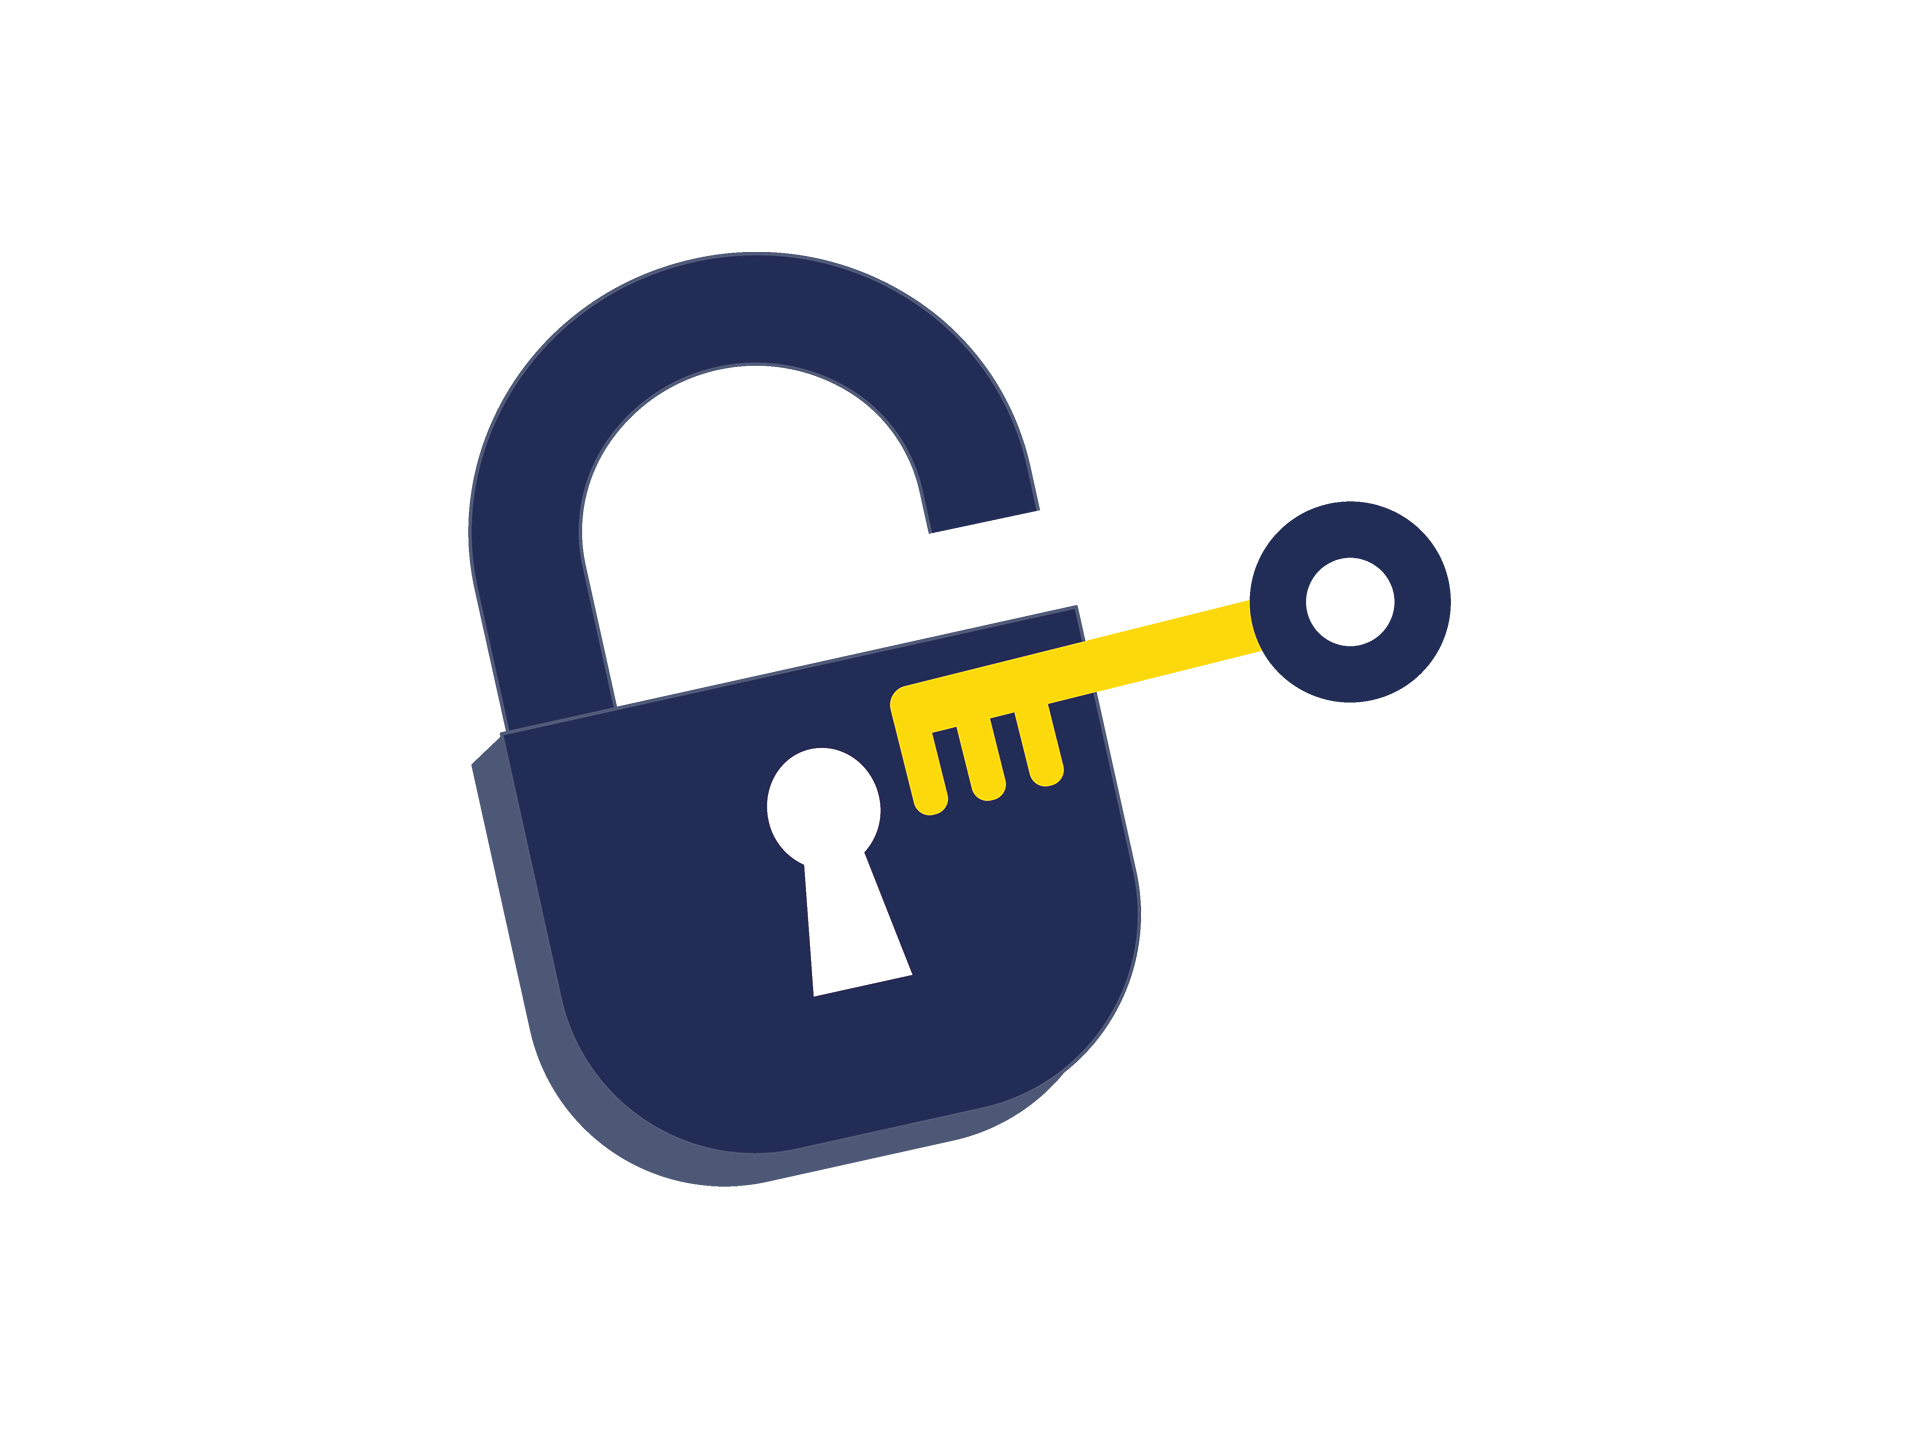 A padlock in navy with a gold coloured key close to the lock mechanism